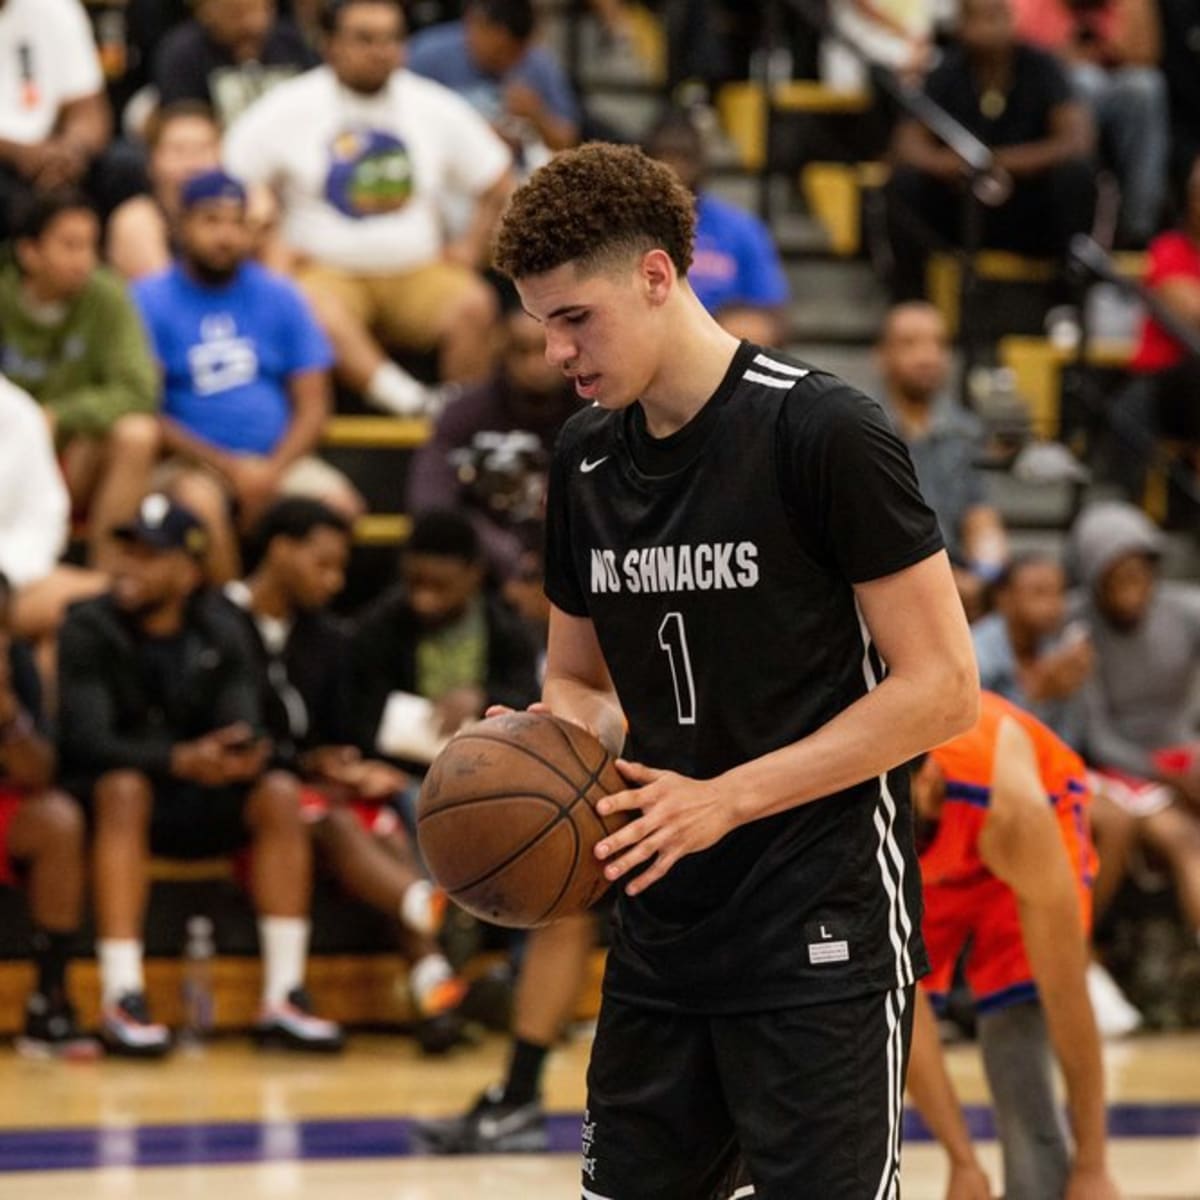 LaMelo Ball, No Shnacks to play in Drew League playoffs on Saturday